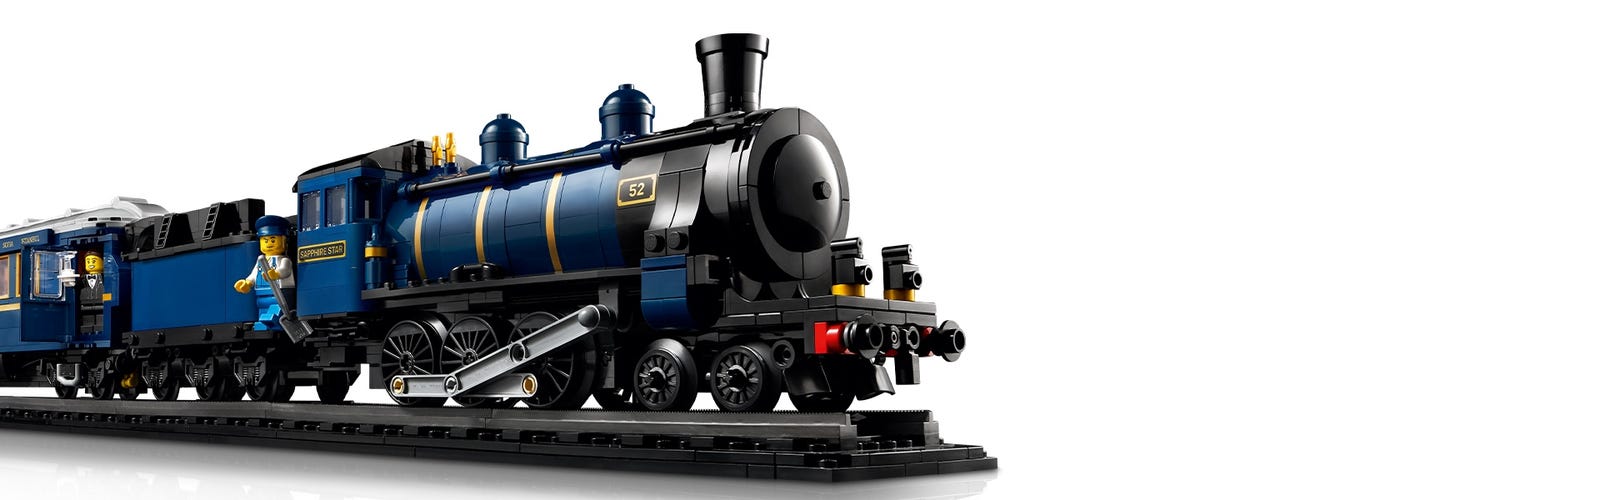 LEGO MOC 21344 Orient Express motorization (powered up) by StijnD